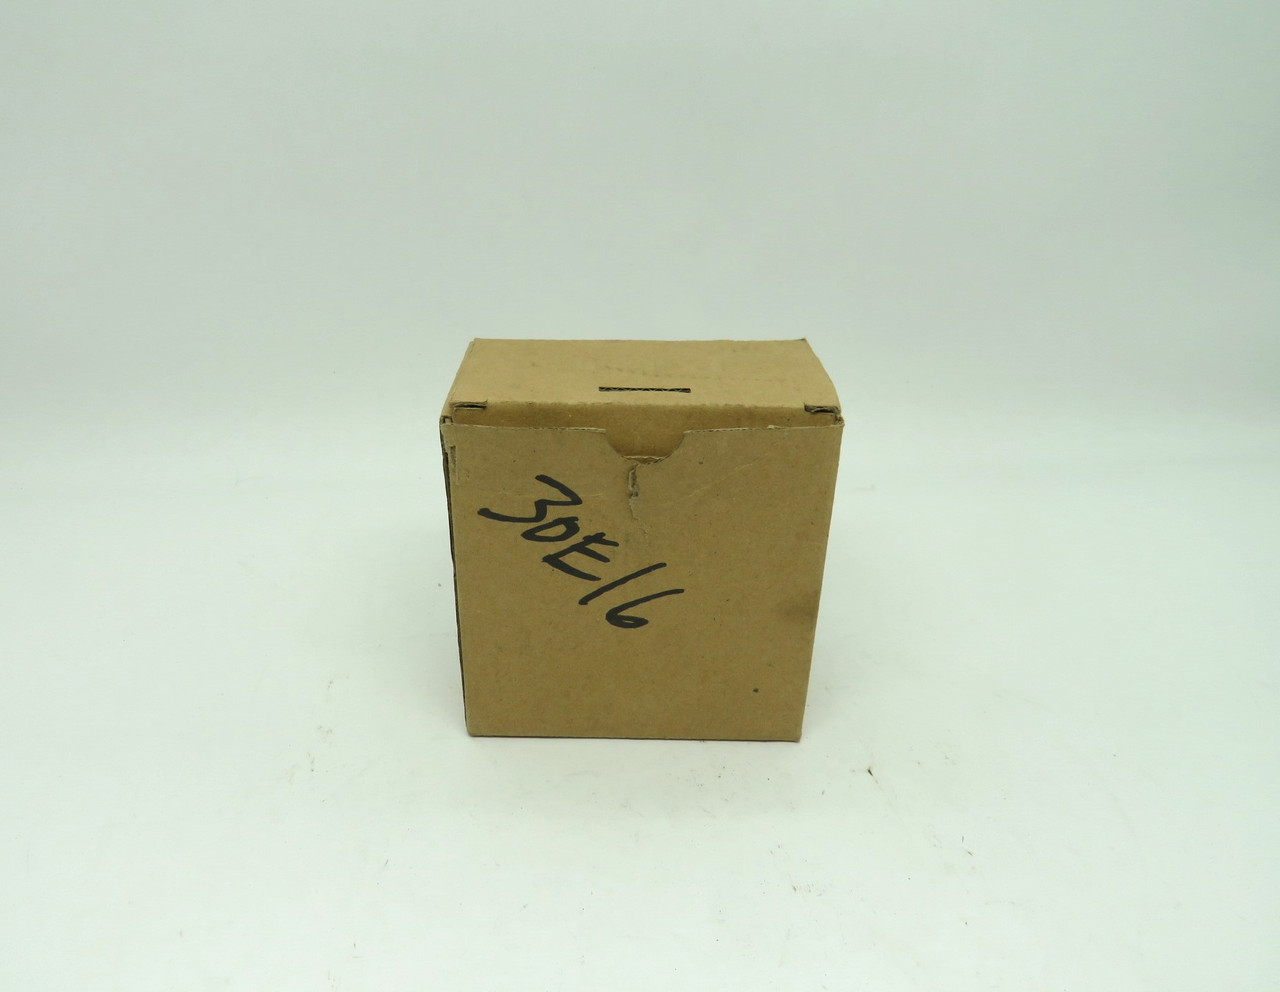 Mean Well MDR-100-24 DIN Rail Power Supply 24V@4A 30VDC@1A *Open Box* NOP